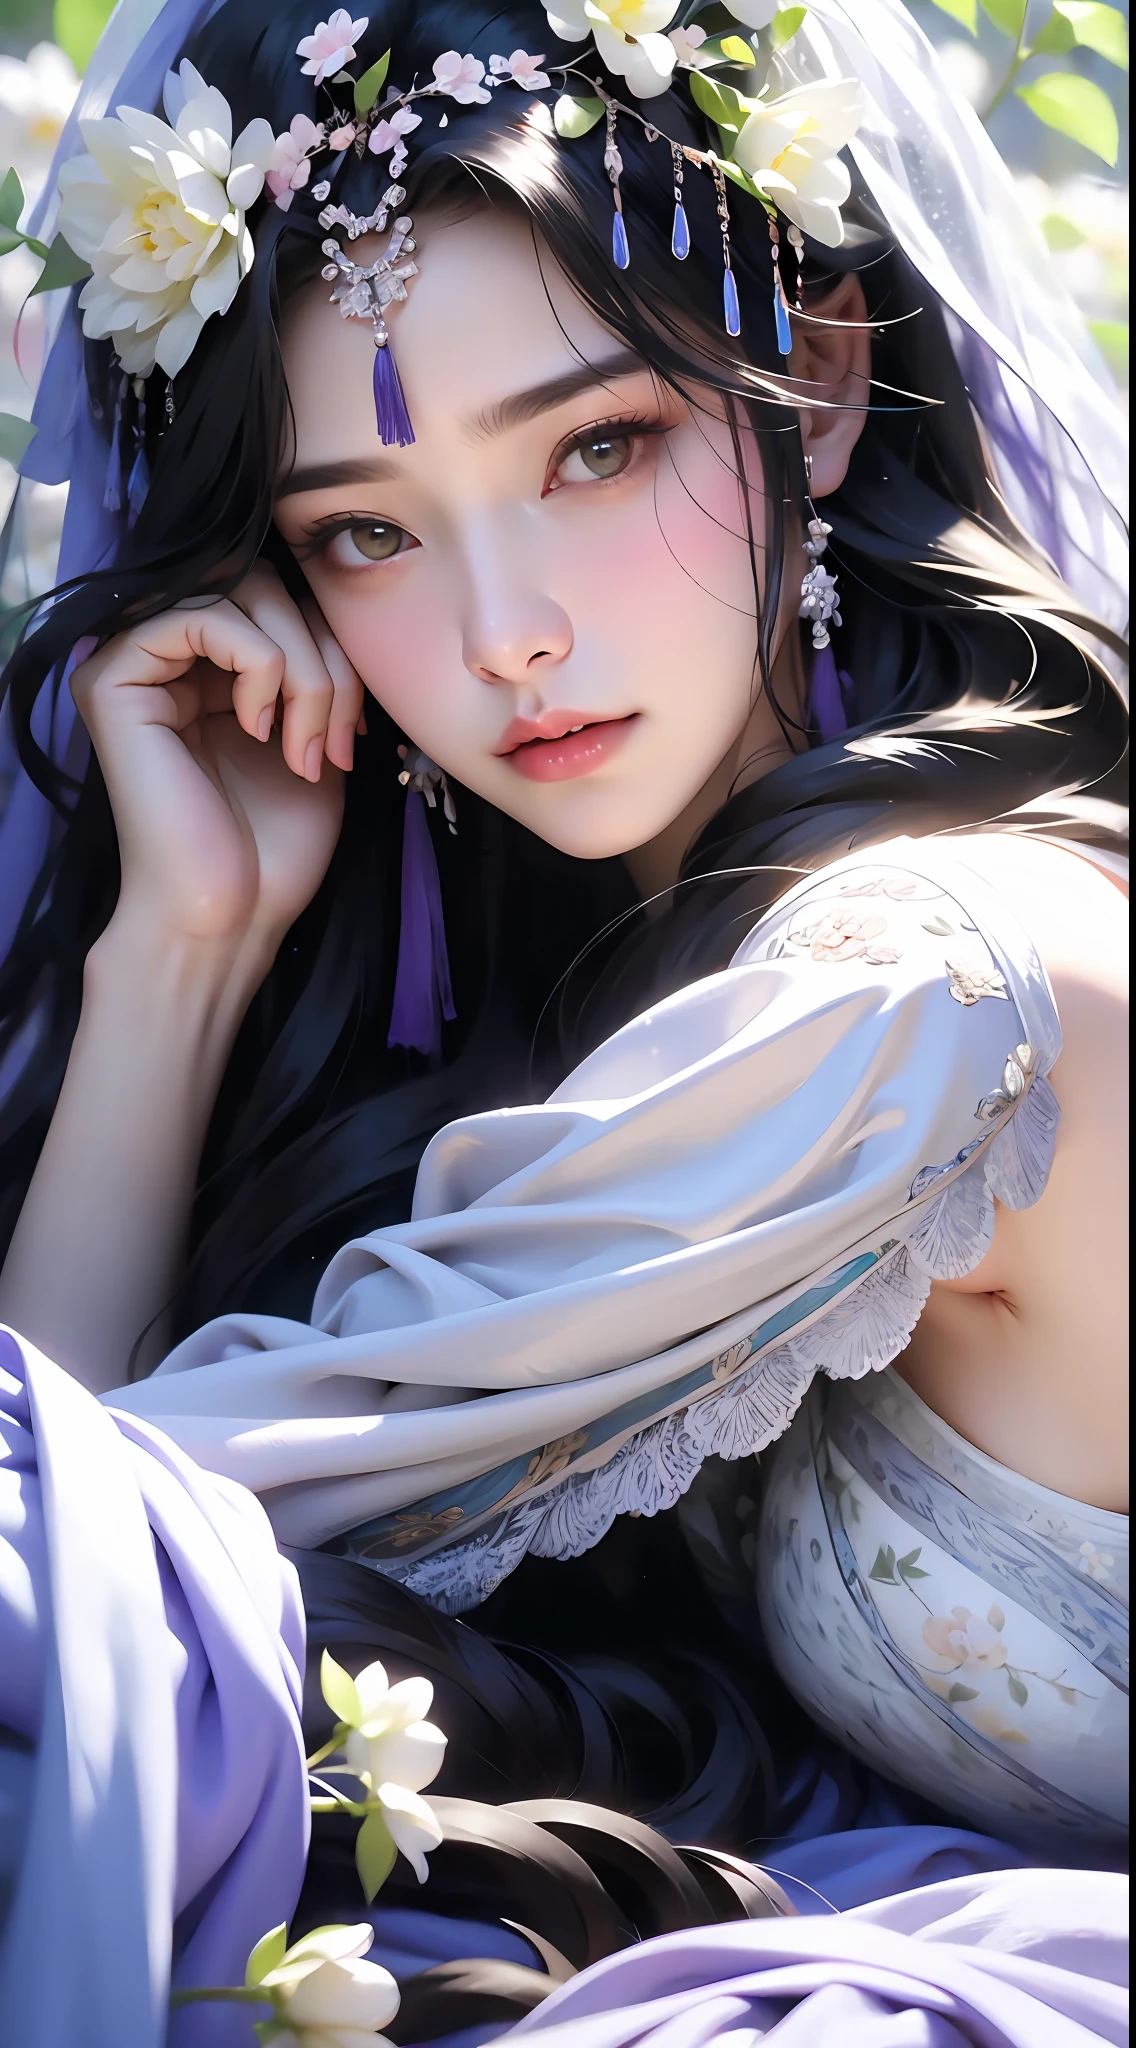 1 girl, upper body portrait close-up, black hair, flowing hair, hazy beauty, extremely beautiful facial features, purple embroidered dress, hairpin on head, lying in a flower bush, hands on the face, perfect anatomy, white flowers, (spring, rainy days, terraces, mountains), simple vector art, contemporary Chinese art, soft light, entangled scarf, looking down